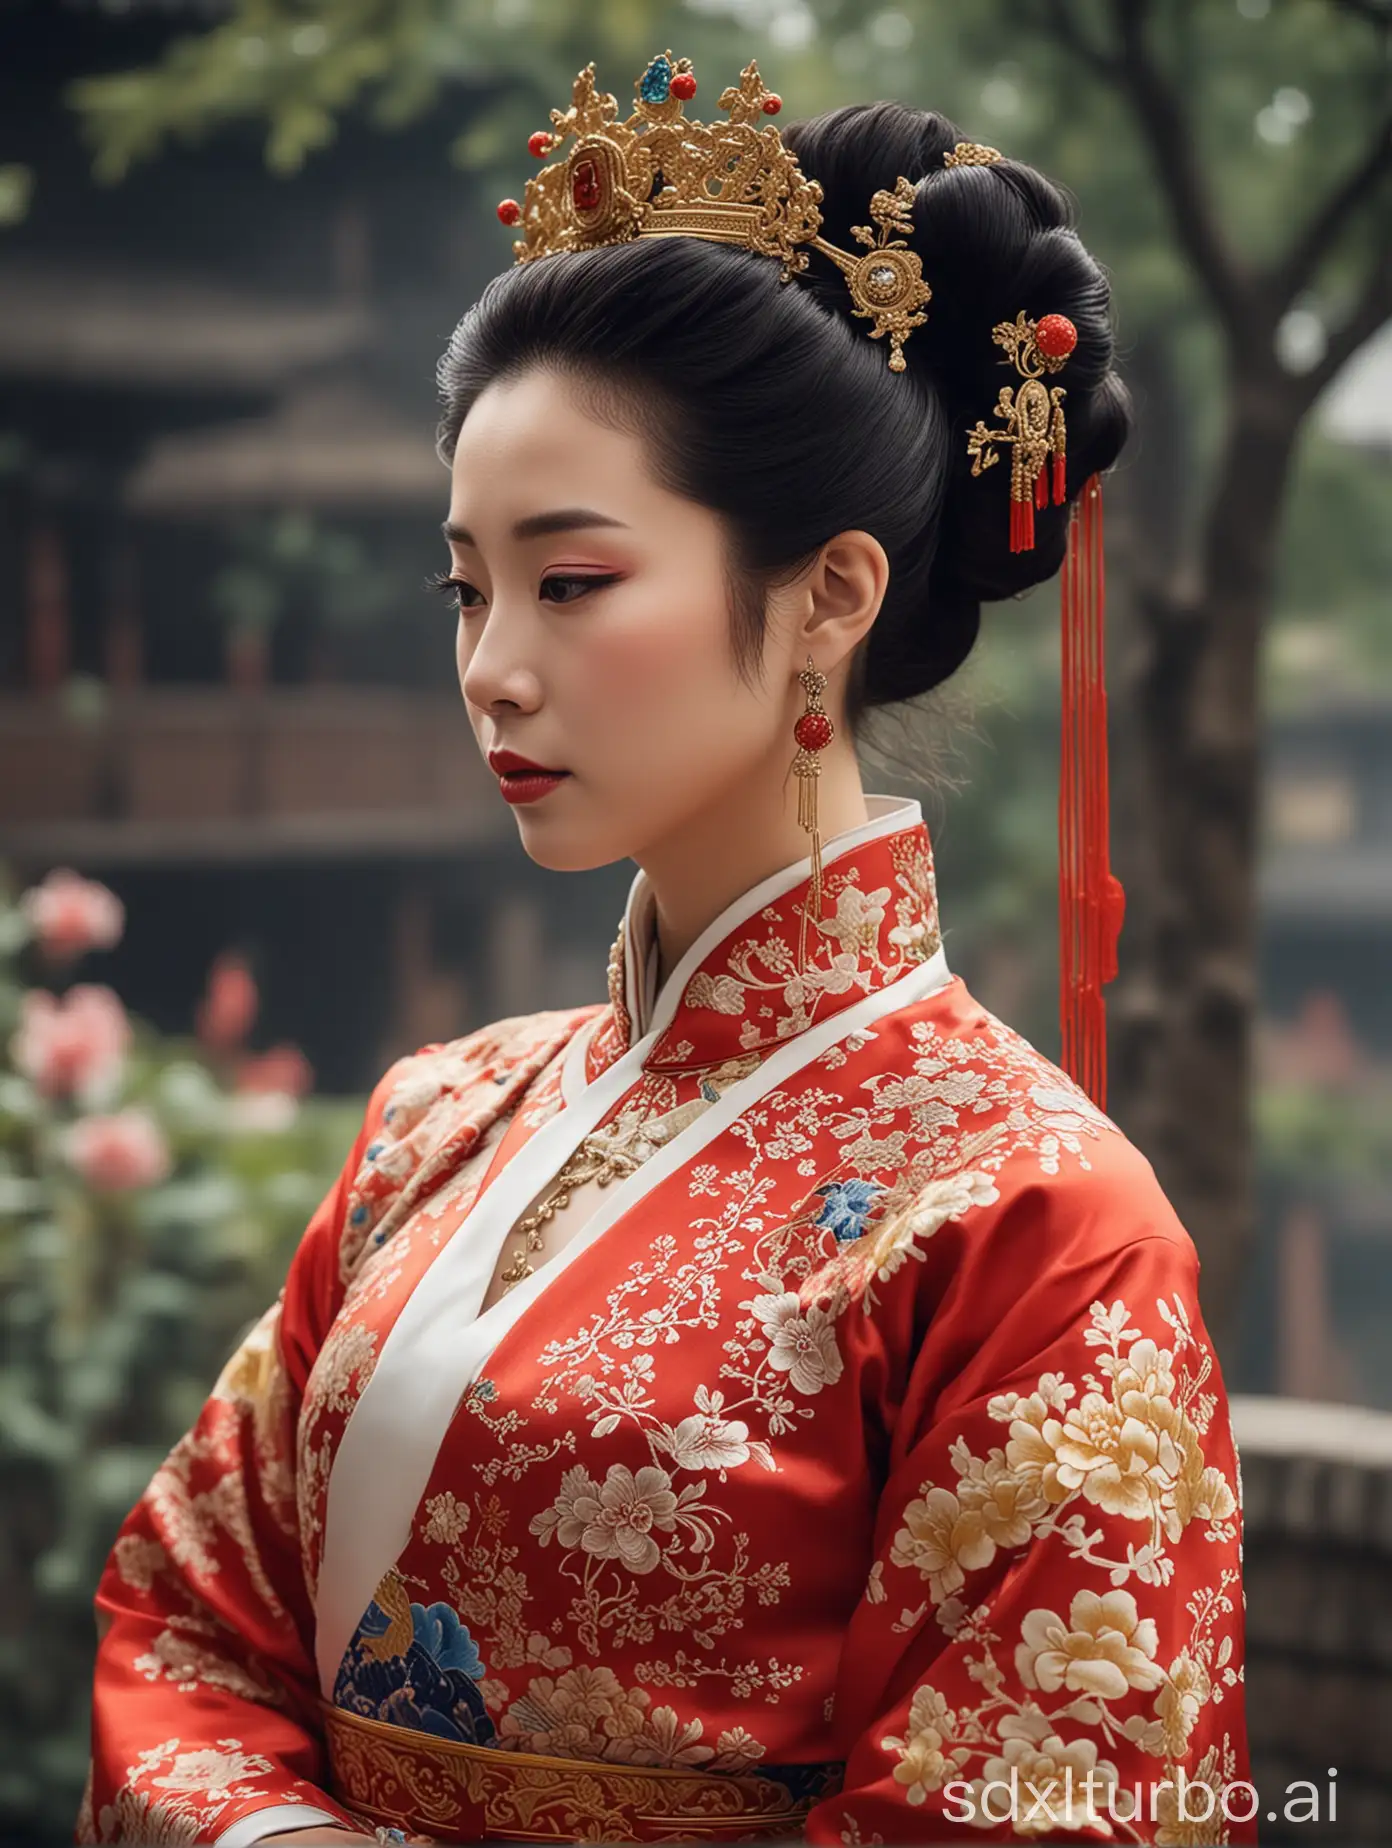 has a queenly majestic air, grand and imposing countenance, wearing traditional Chinese dress, hair piled high